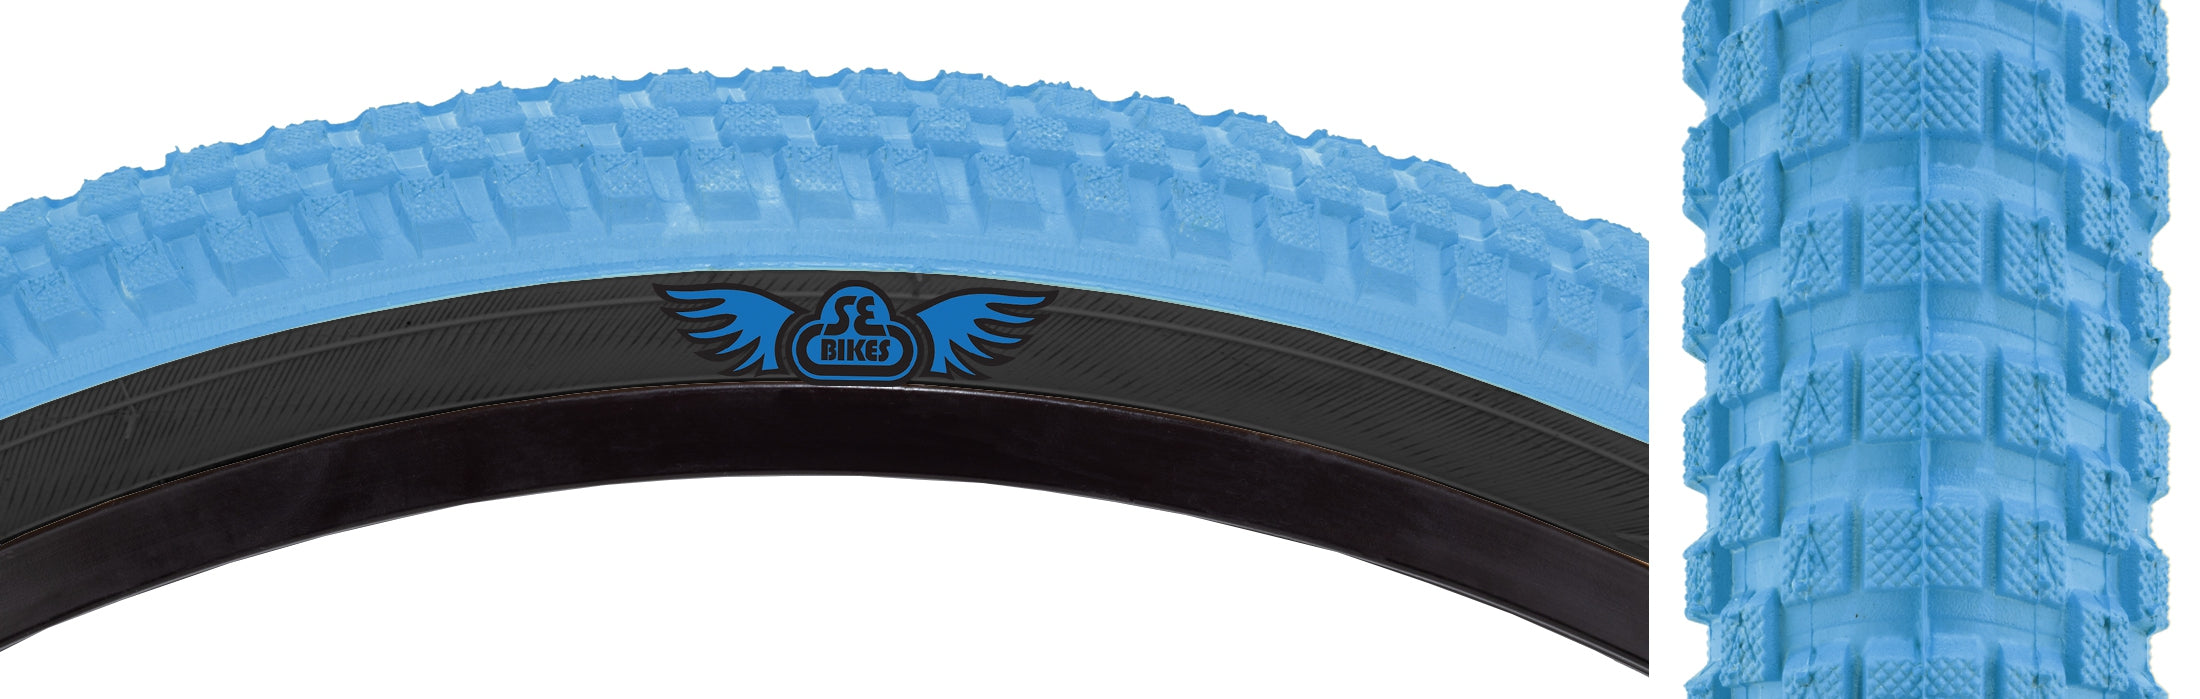 side view of cub tire in light blue